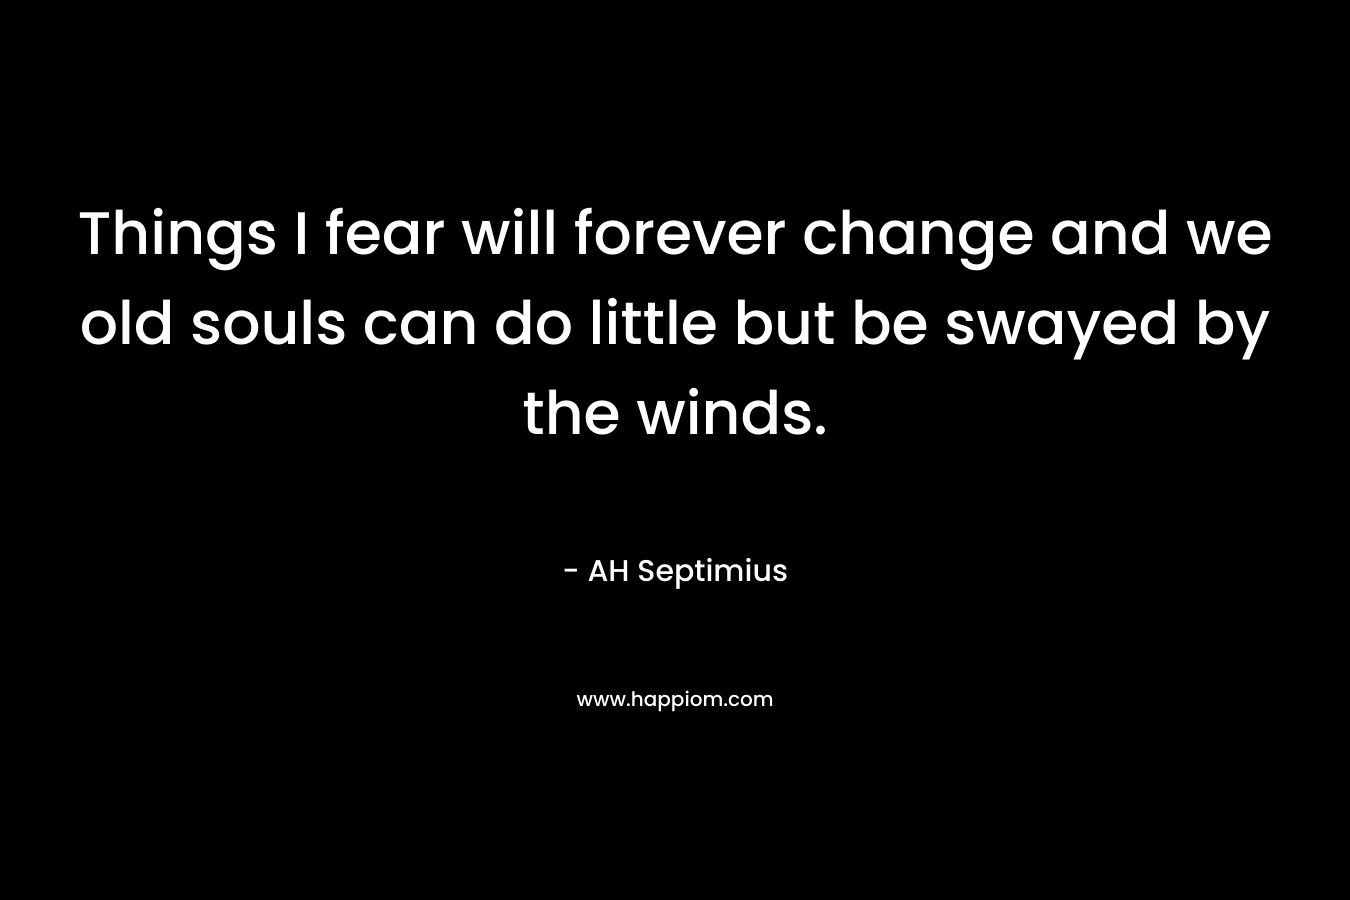 Things I fear will forever change and we old souls can do little but be swayed by the winds. – AH Septimius